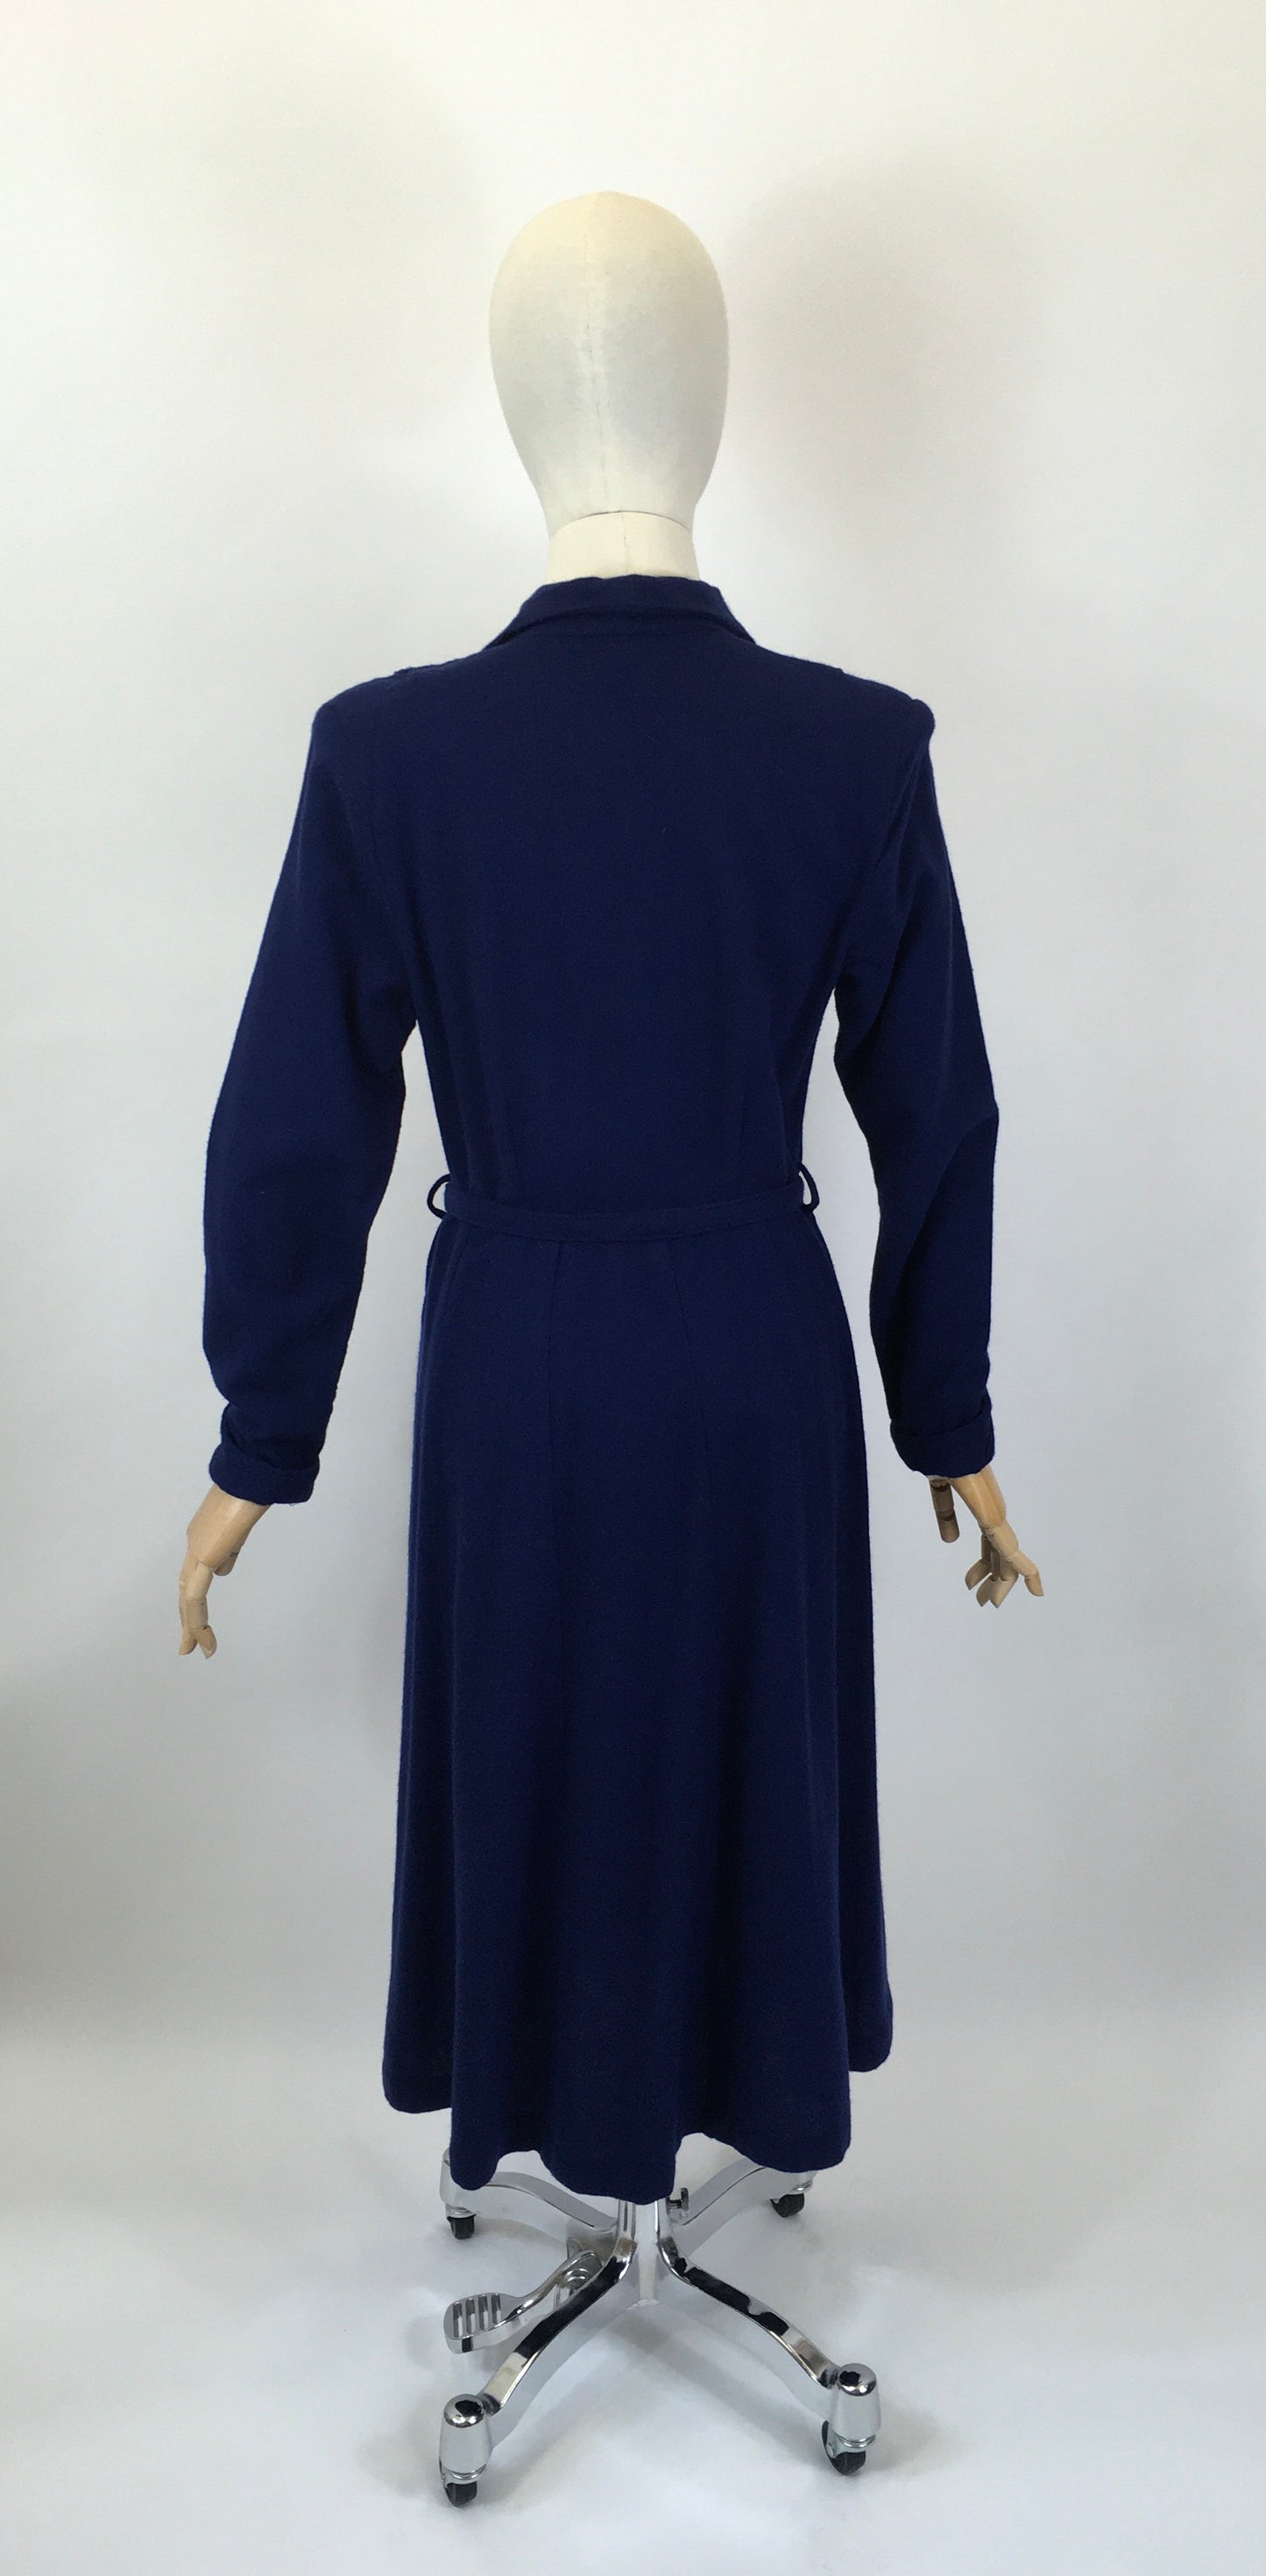 Original 1940's Sensational CC41 Utility Wool Dress - In A Royal Blue with Floral Embellishment